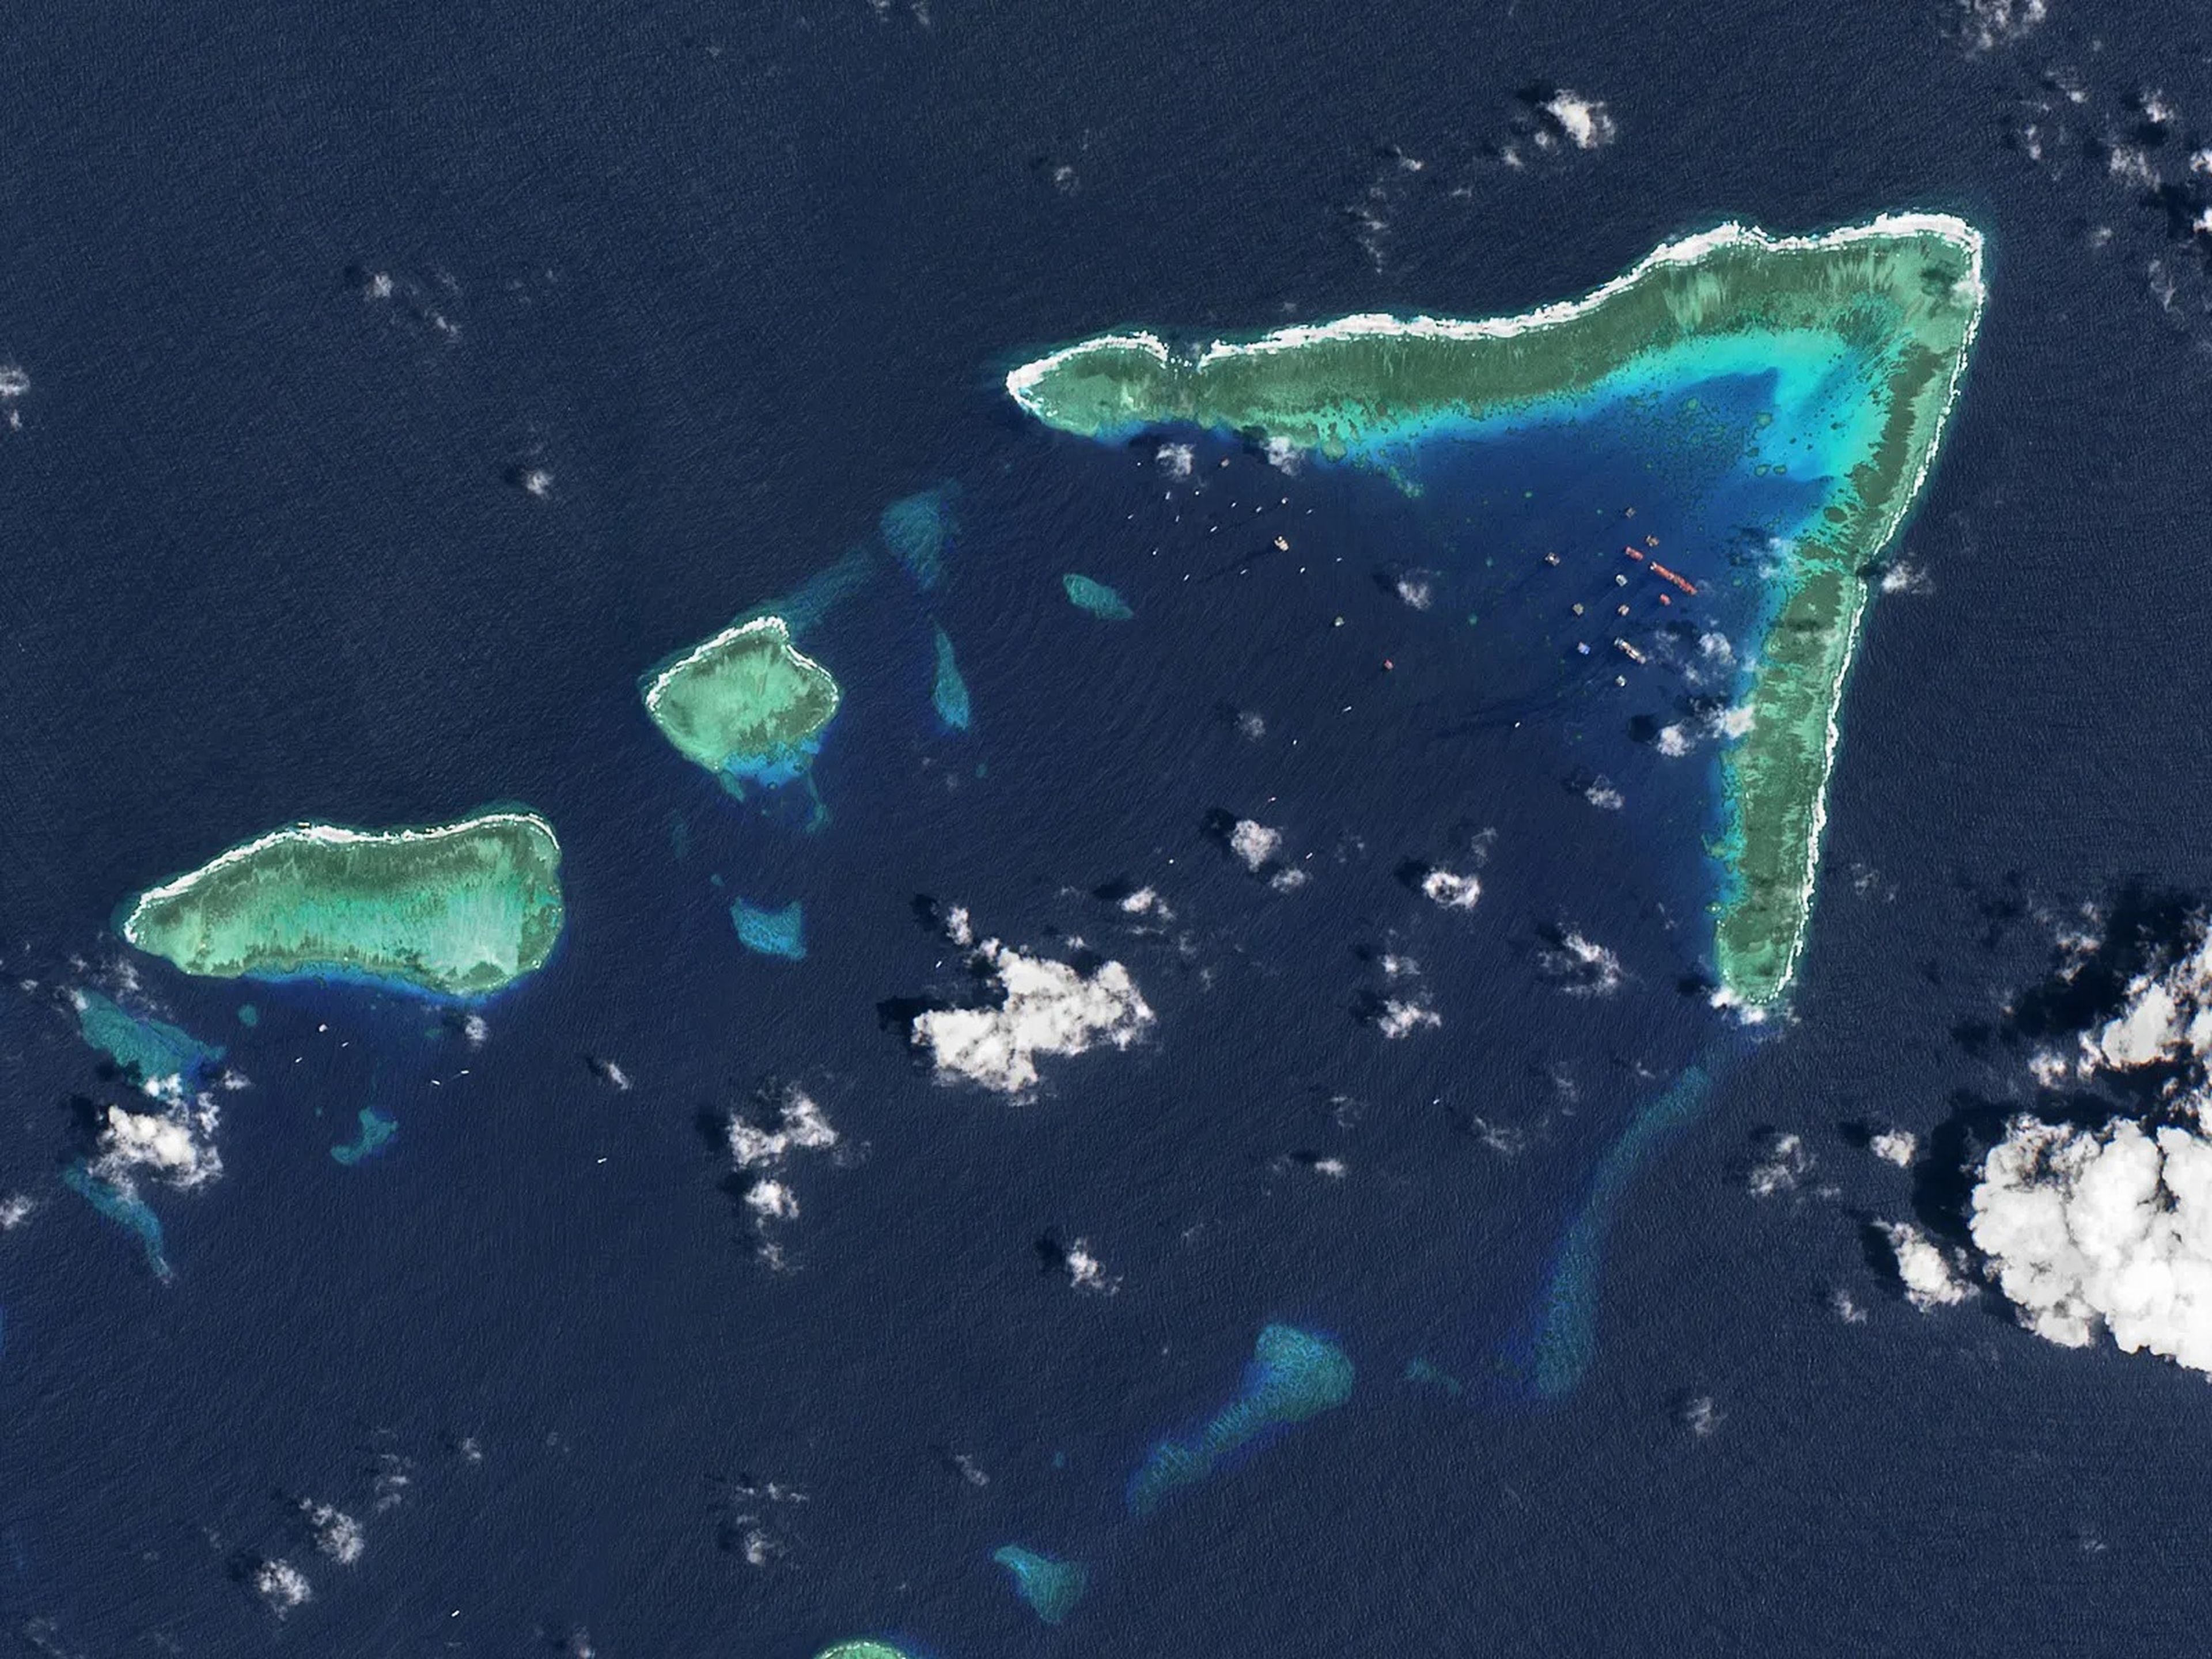 An aerial view of Whitsun Reef, Spratly Islands, South China Sea imaged 24 March 2021.